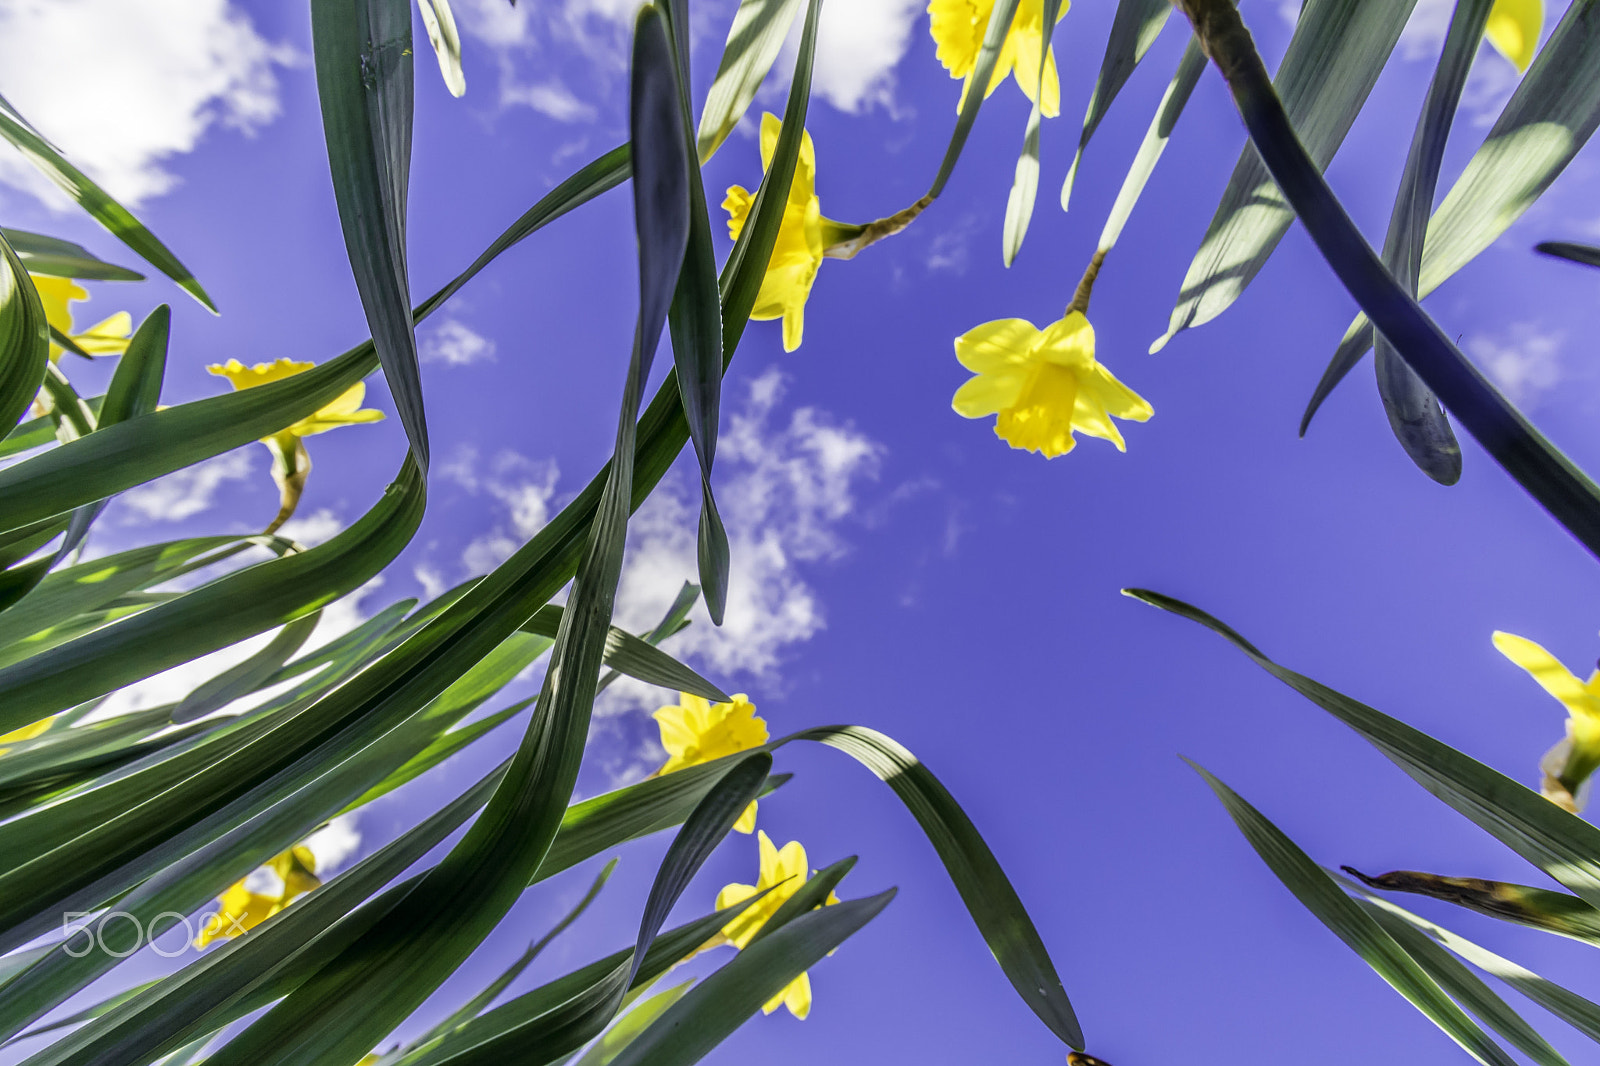 Nikon D5200 + Tamron SP AF 10-24mm F3.5-4.5 Di II LD Aspherical (IF) sample photo. Ants eye view of daffodils photography